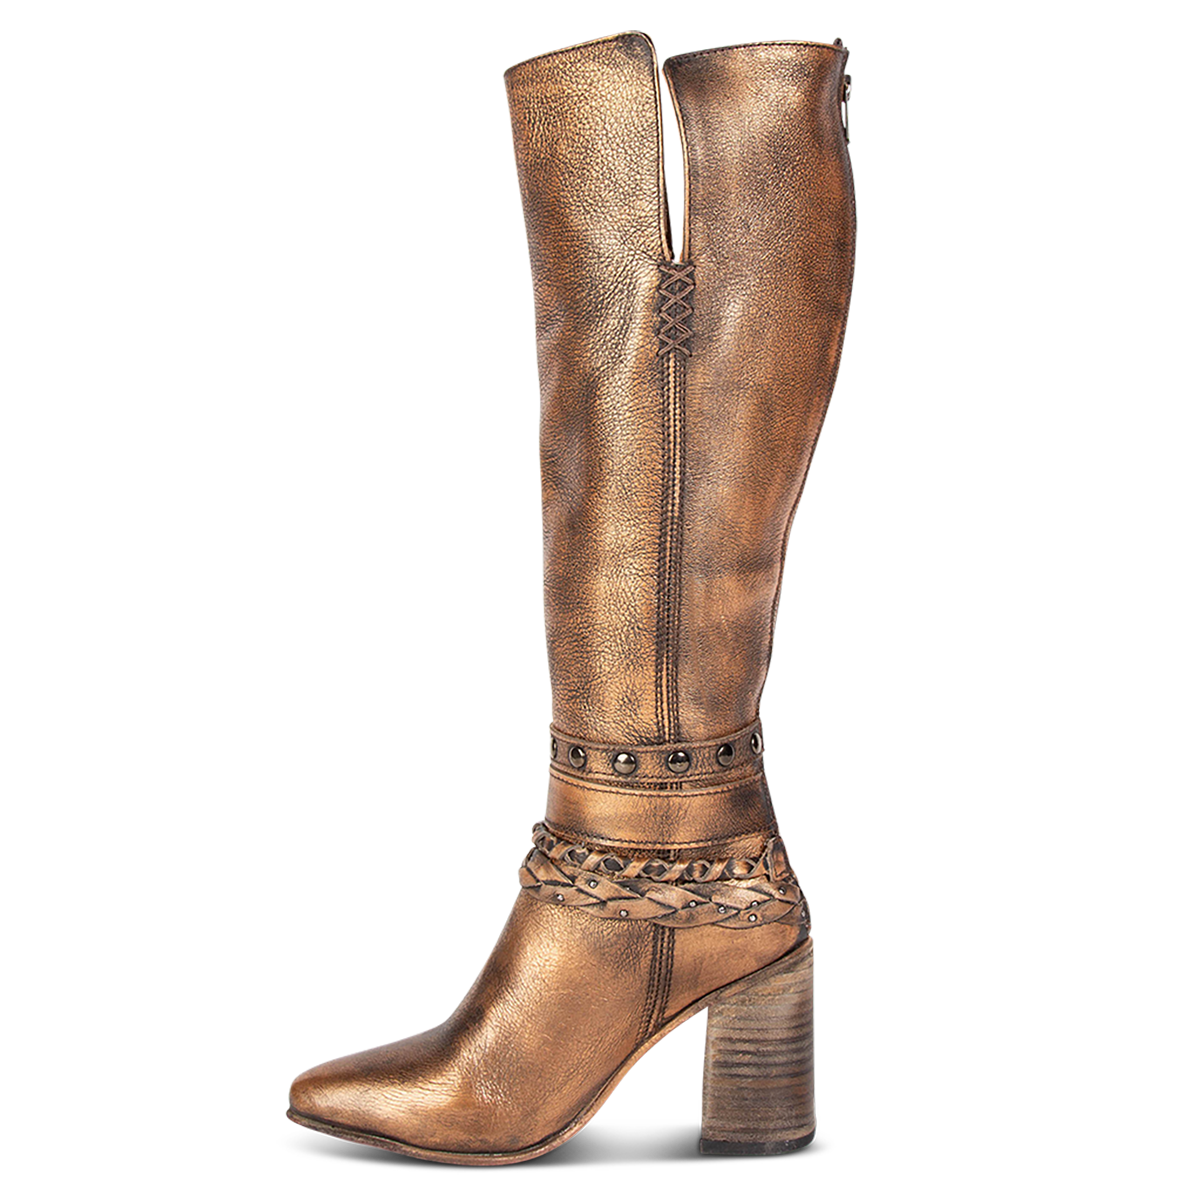 Inside view showing stacked heel, braided and studded ankle strap detailing, and side slits on FREEBIRD women's Juniper bronze heeled boot